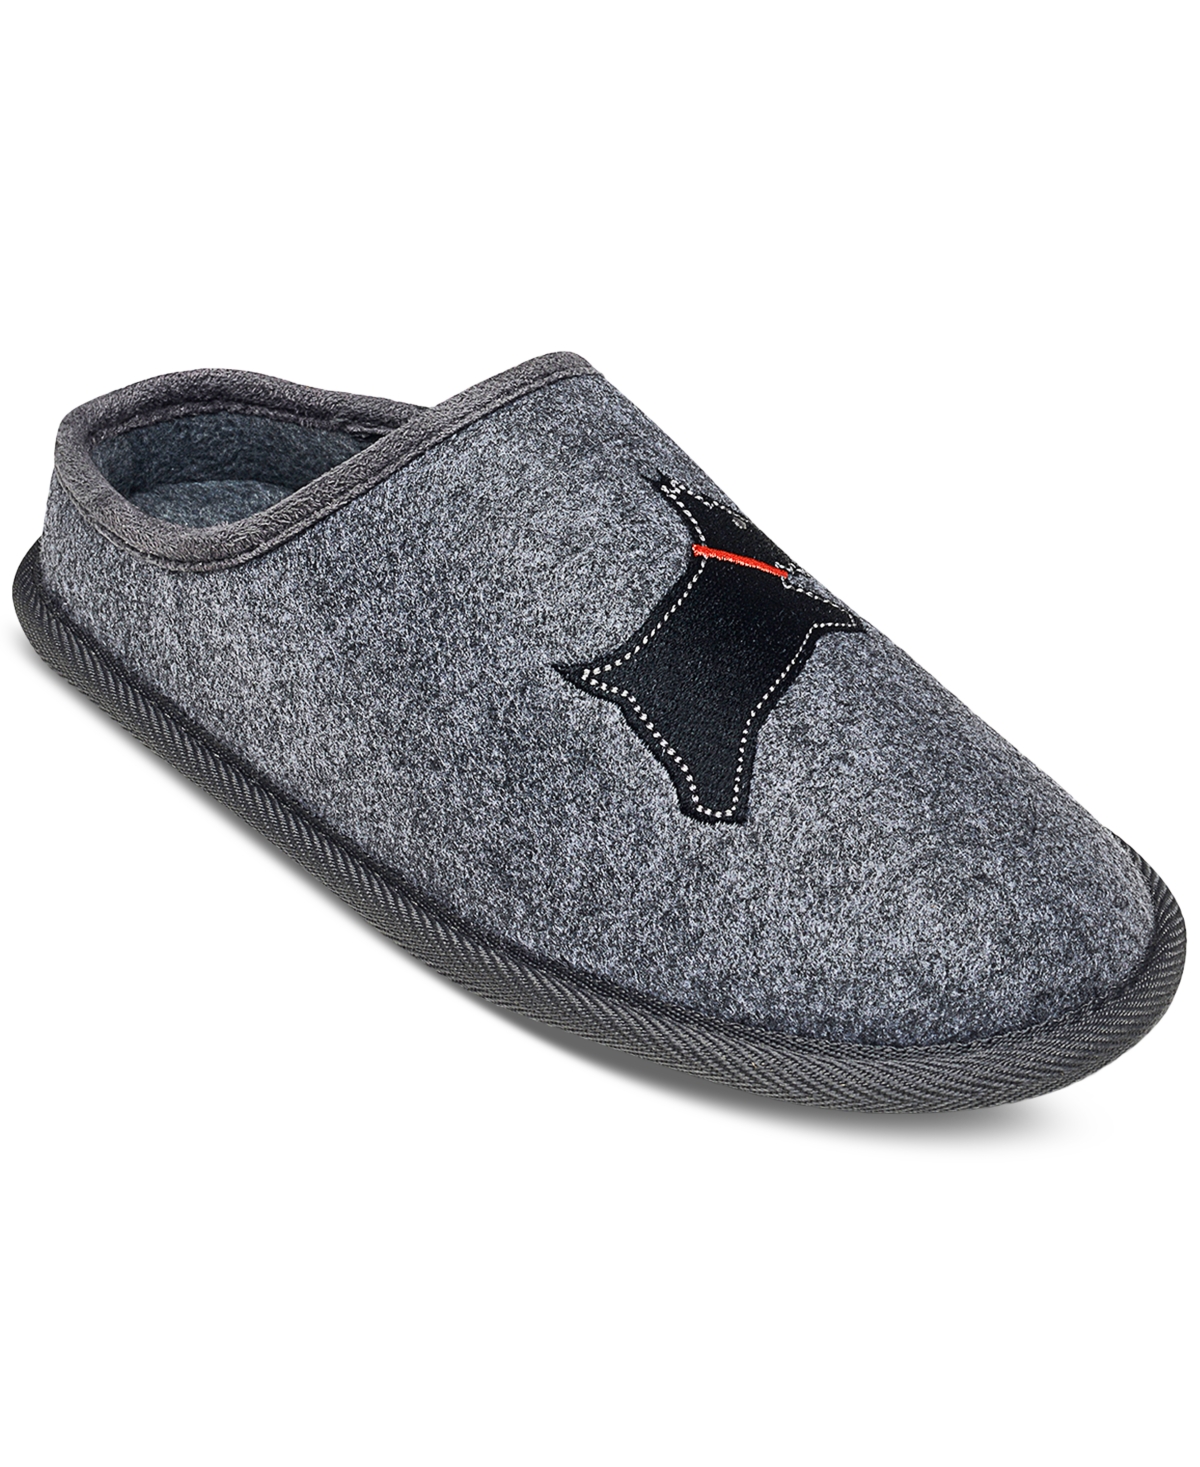 Women's Super Cosy Embroidered Mule Slippers - Charcoal